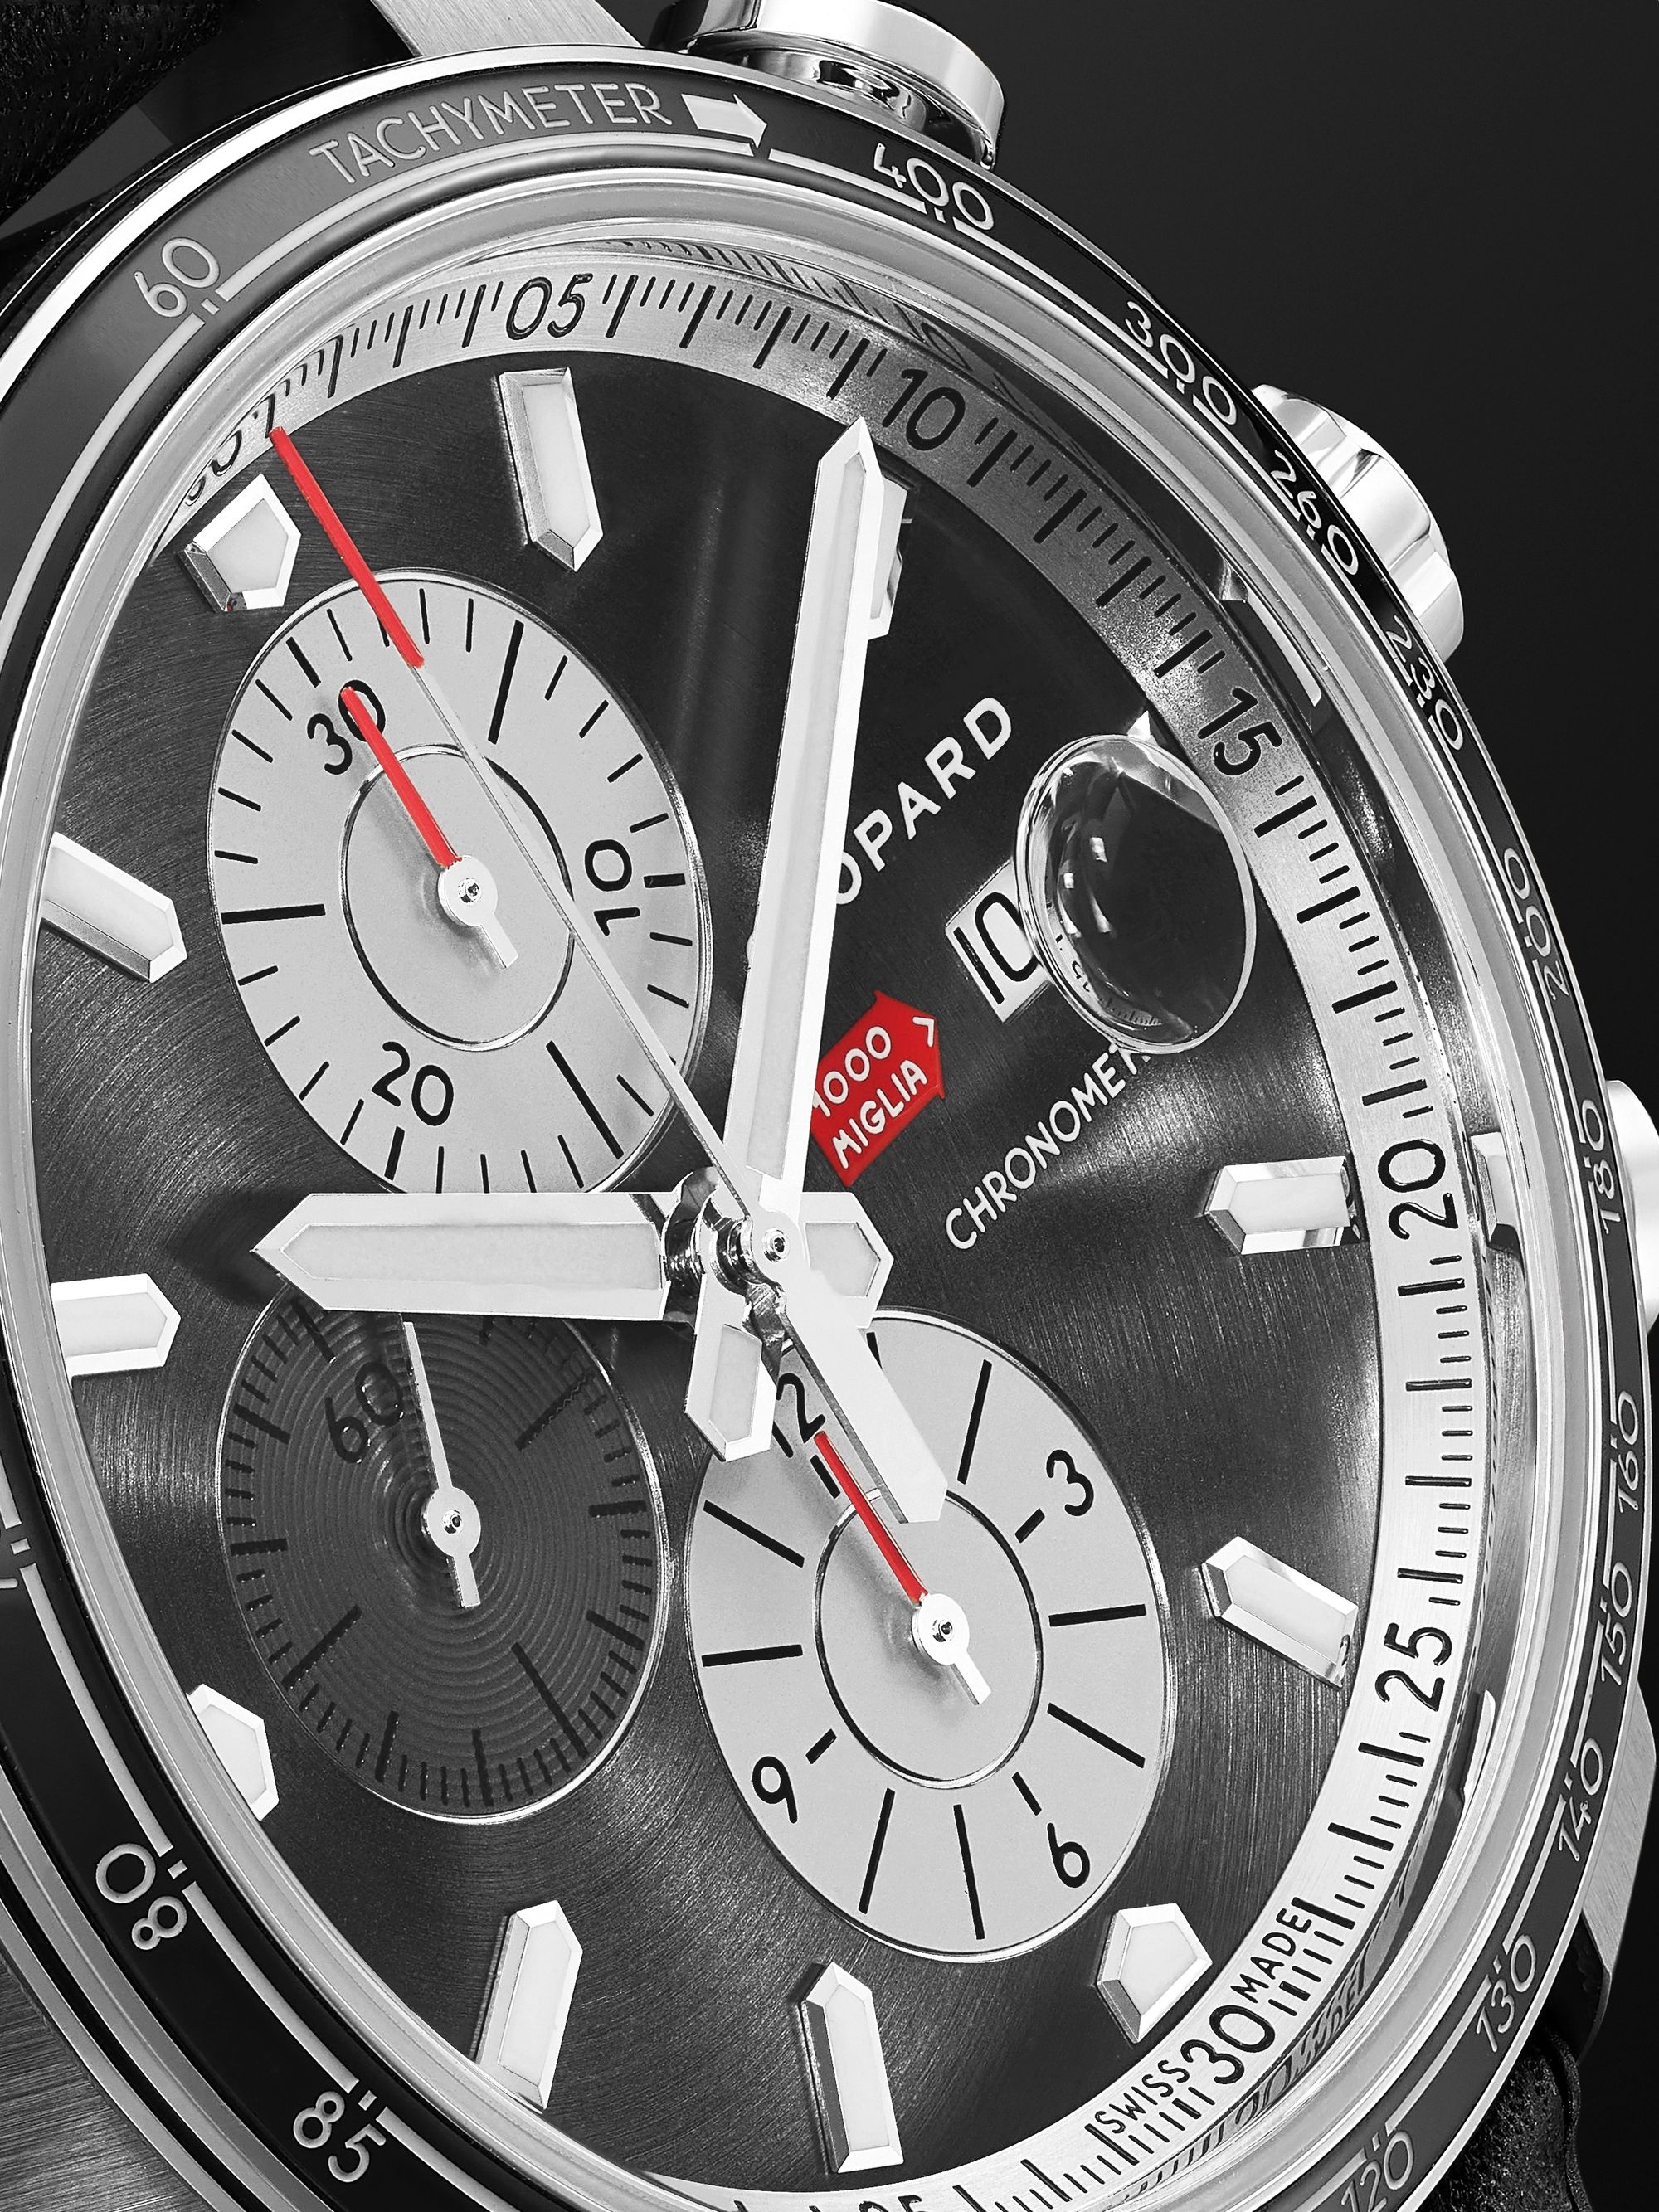 CHOPARD Mille Miglia 2021 Race Edition Limited Edition Automatic Chronograph 44mm Stainless Steel and Leather Watch, Ref. No.